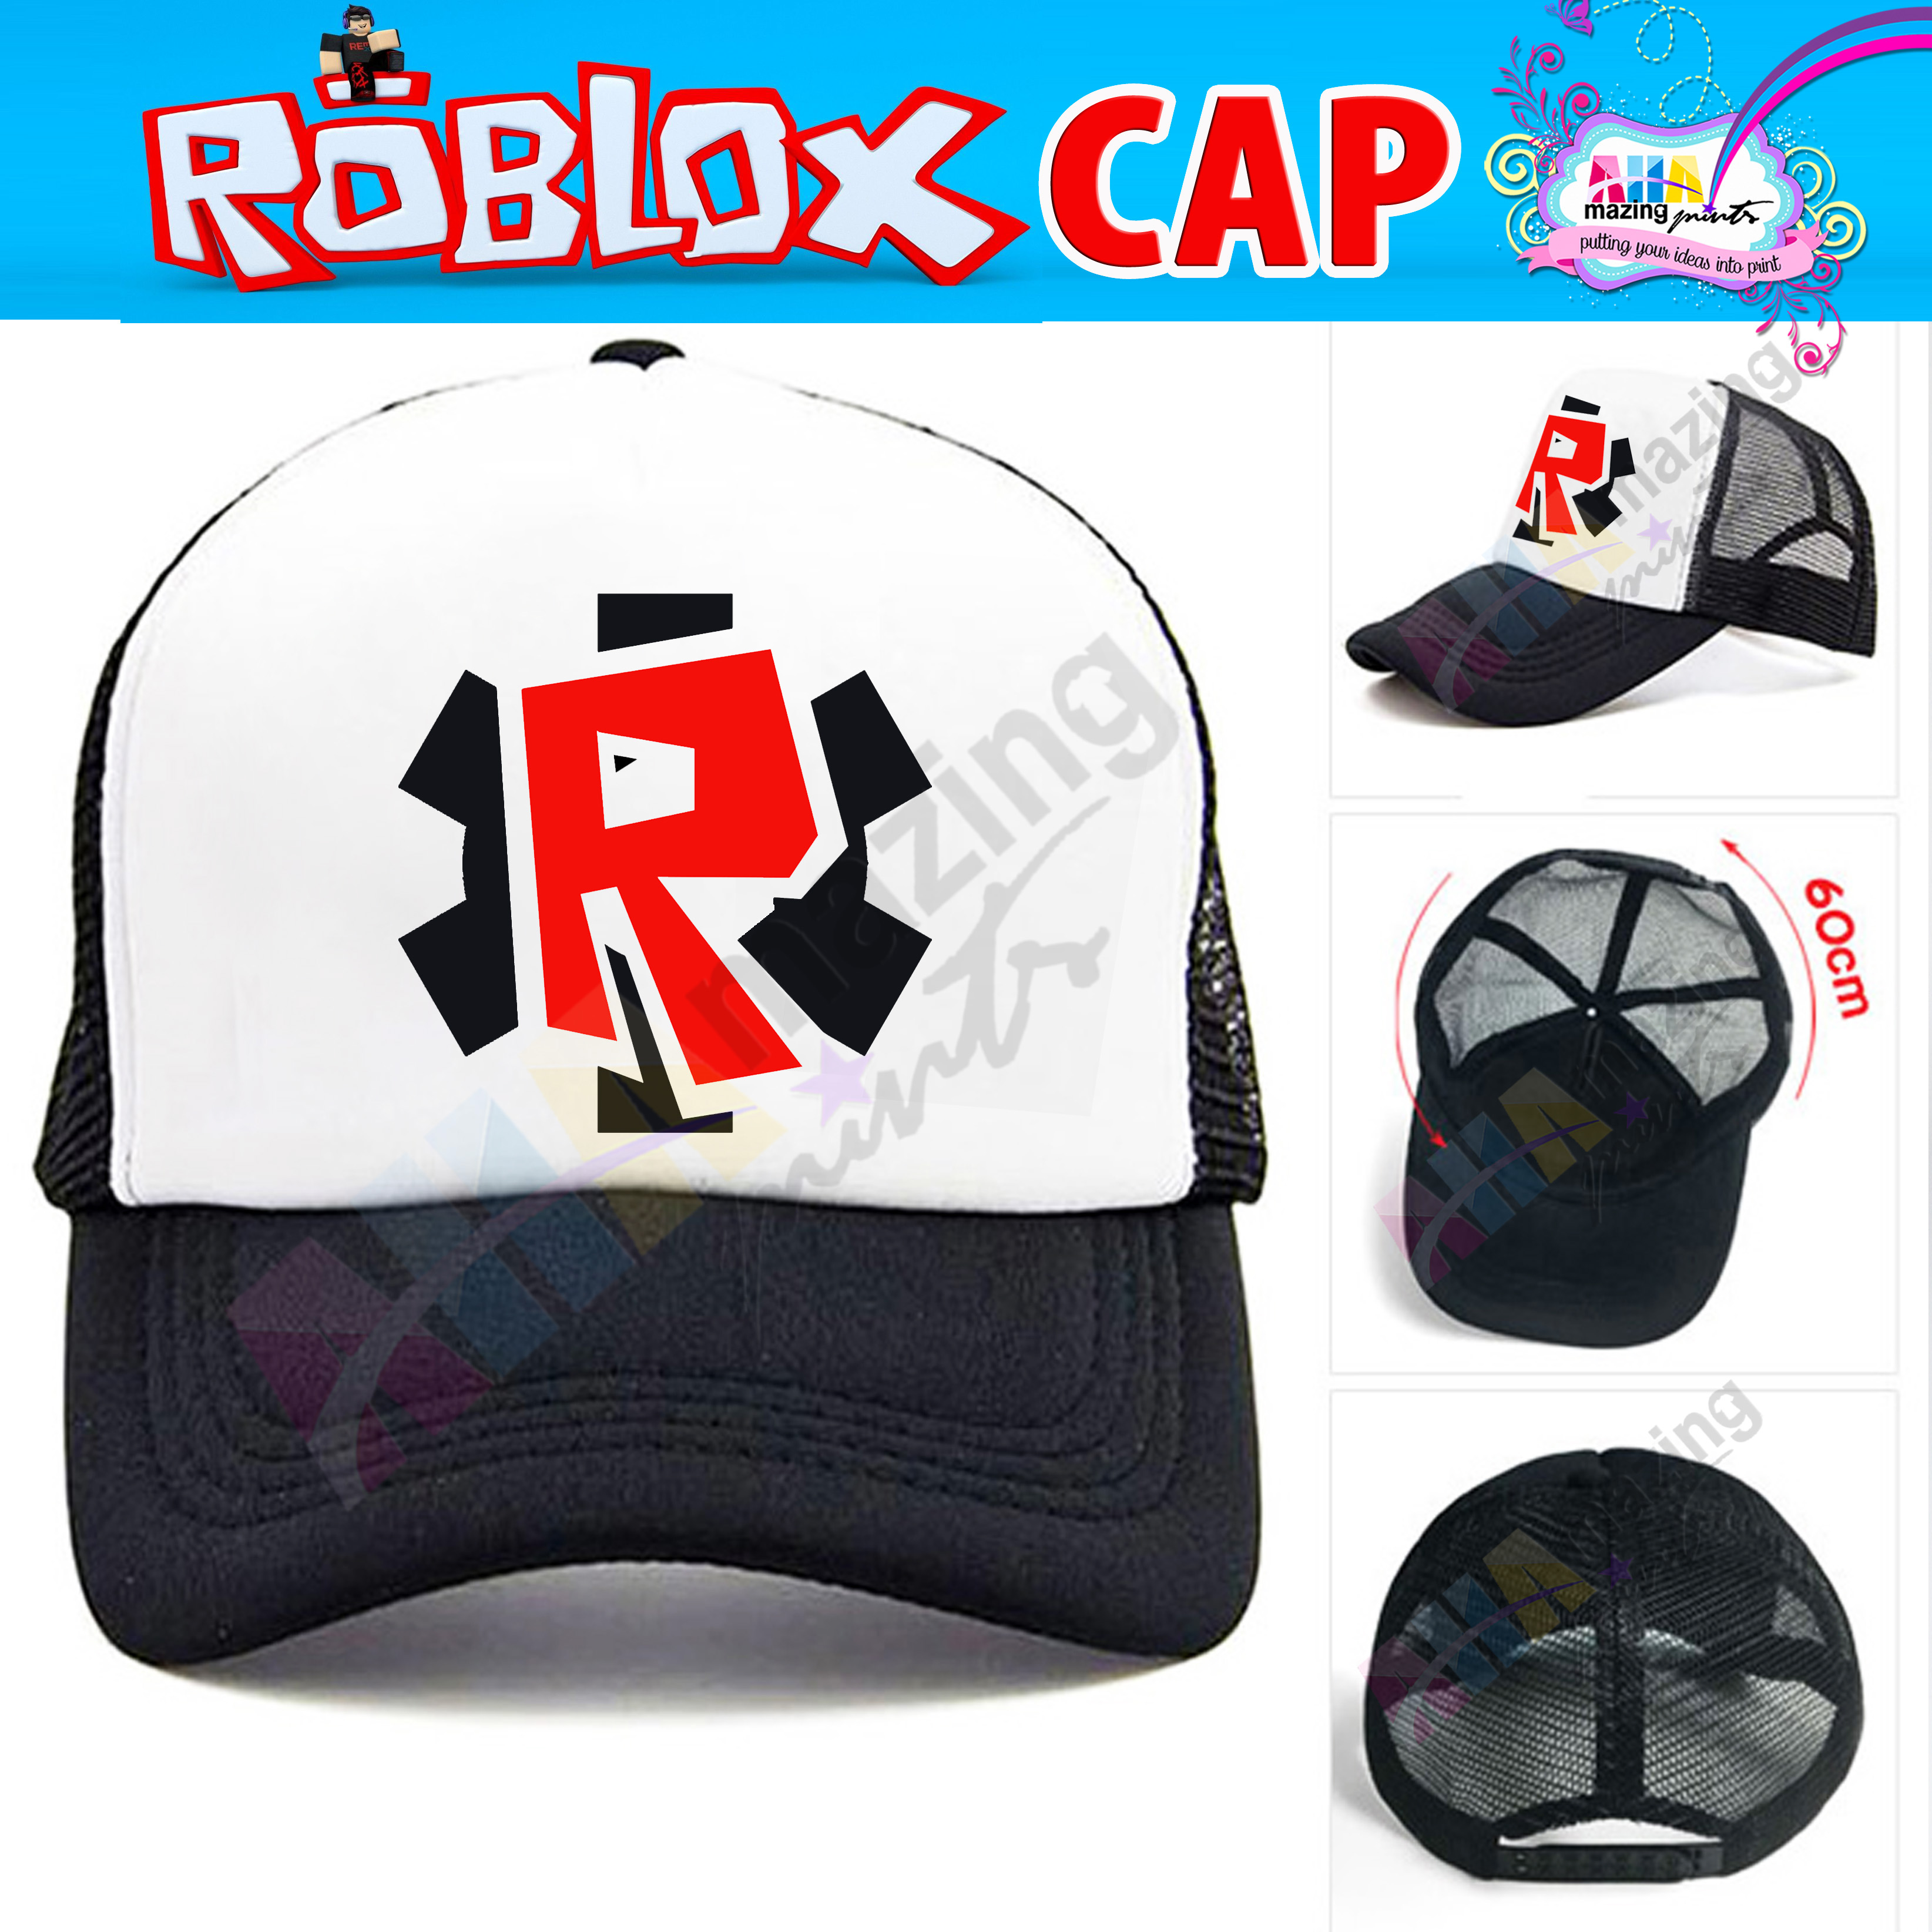 Roblox Cap Gear Black One Size Only Free Size Only Pls Read Description Fashion Boys Girls Unisex Statement Casual Custom Children Wear Cute Trending Viral Ootd High Quality Birthday Christmas Ninang Ninong - free roblox hats cute